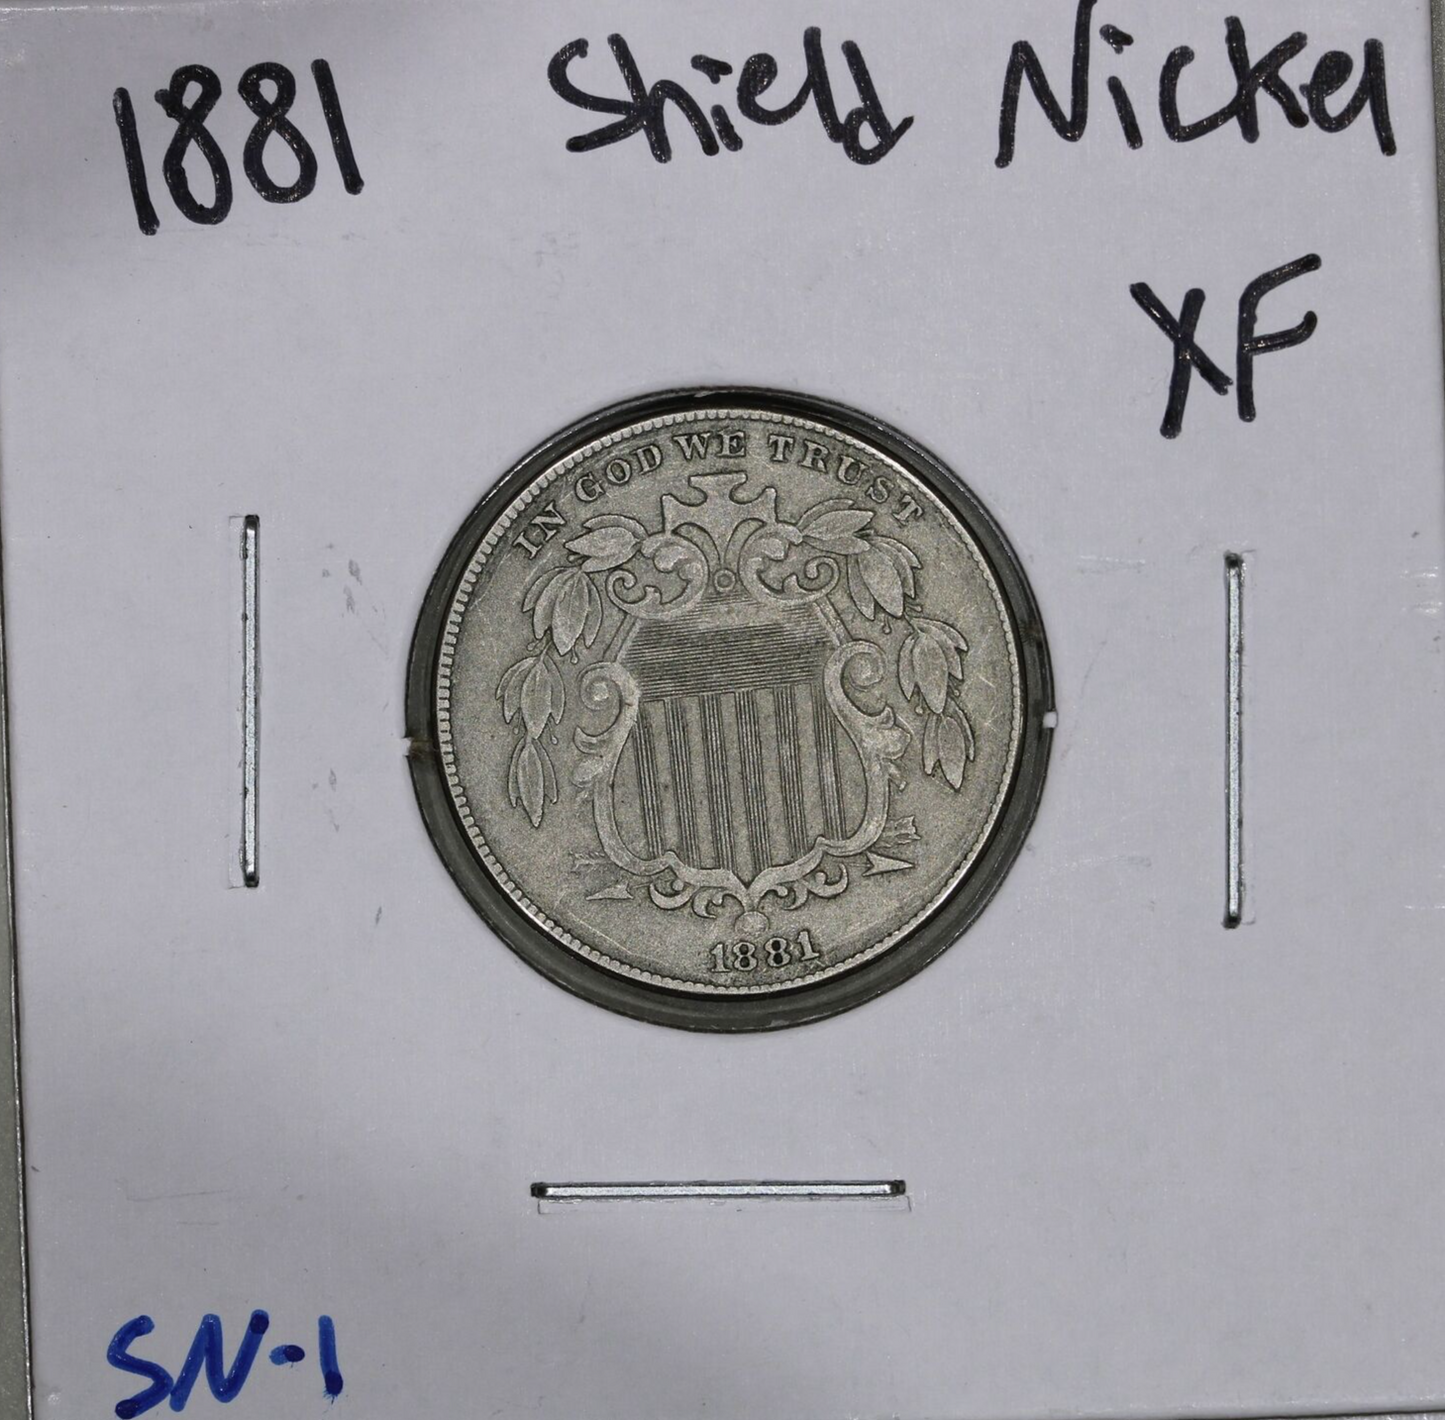 1881 (XF) Shield Nickel 5C US Coin Extremely Fine